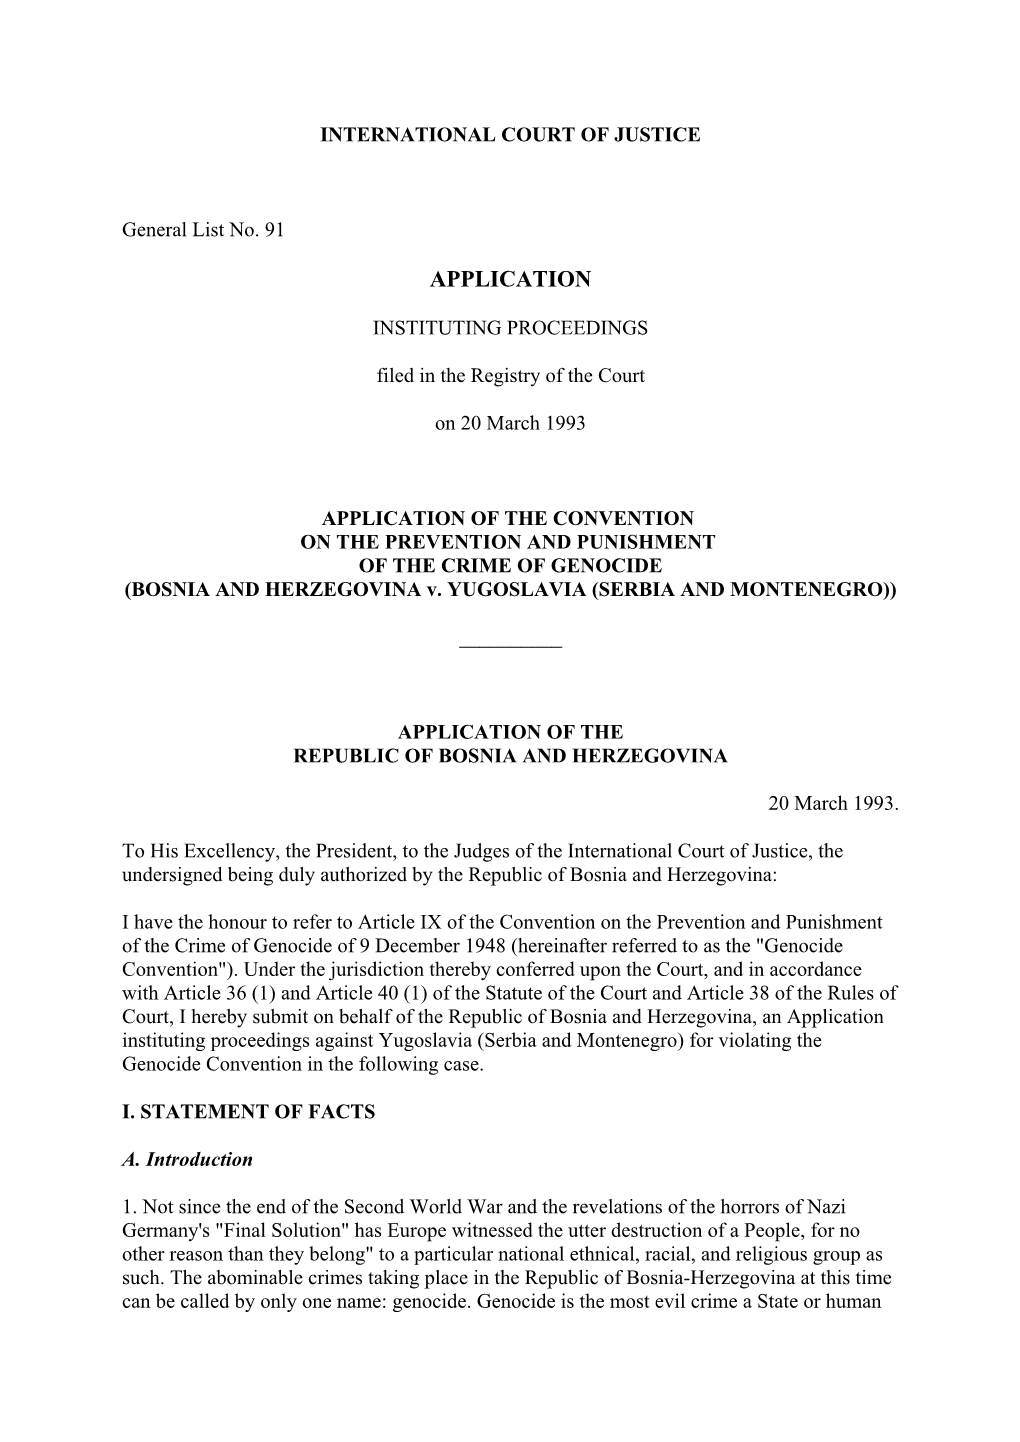 Application Instituting Proceedings Against Yugoslavia (Serbia and Montenegro) for Violating the Genocide Convention in the Following Case